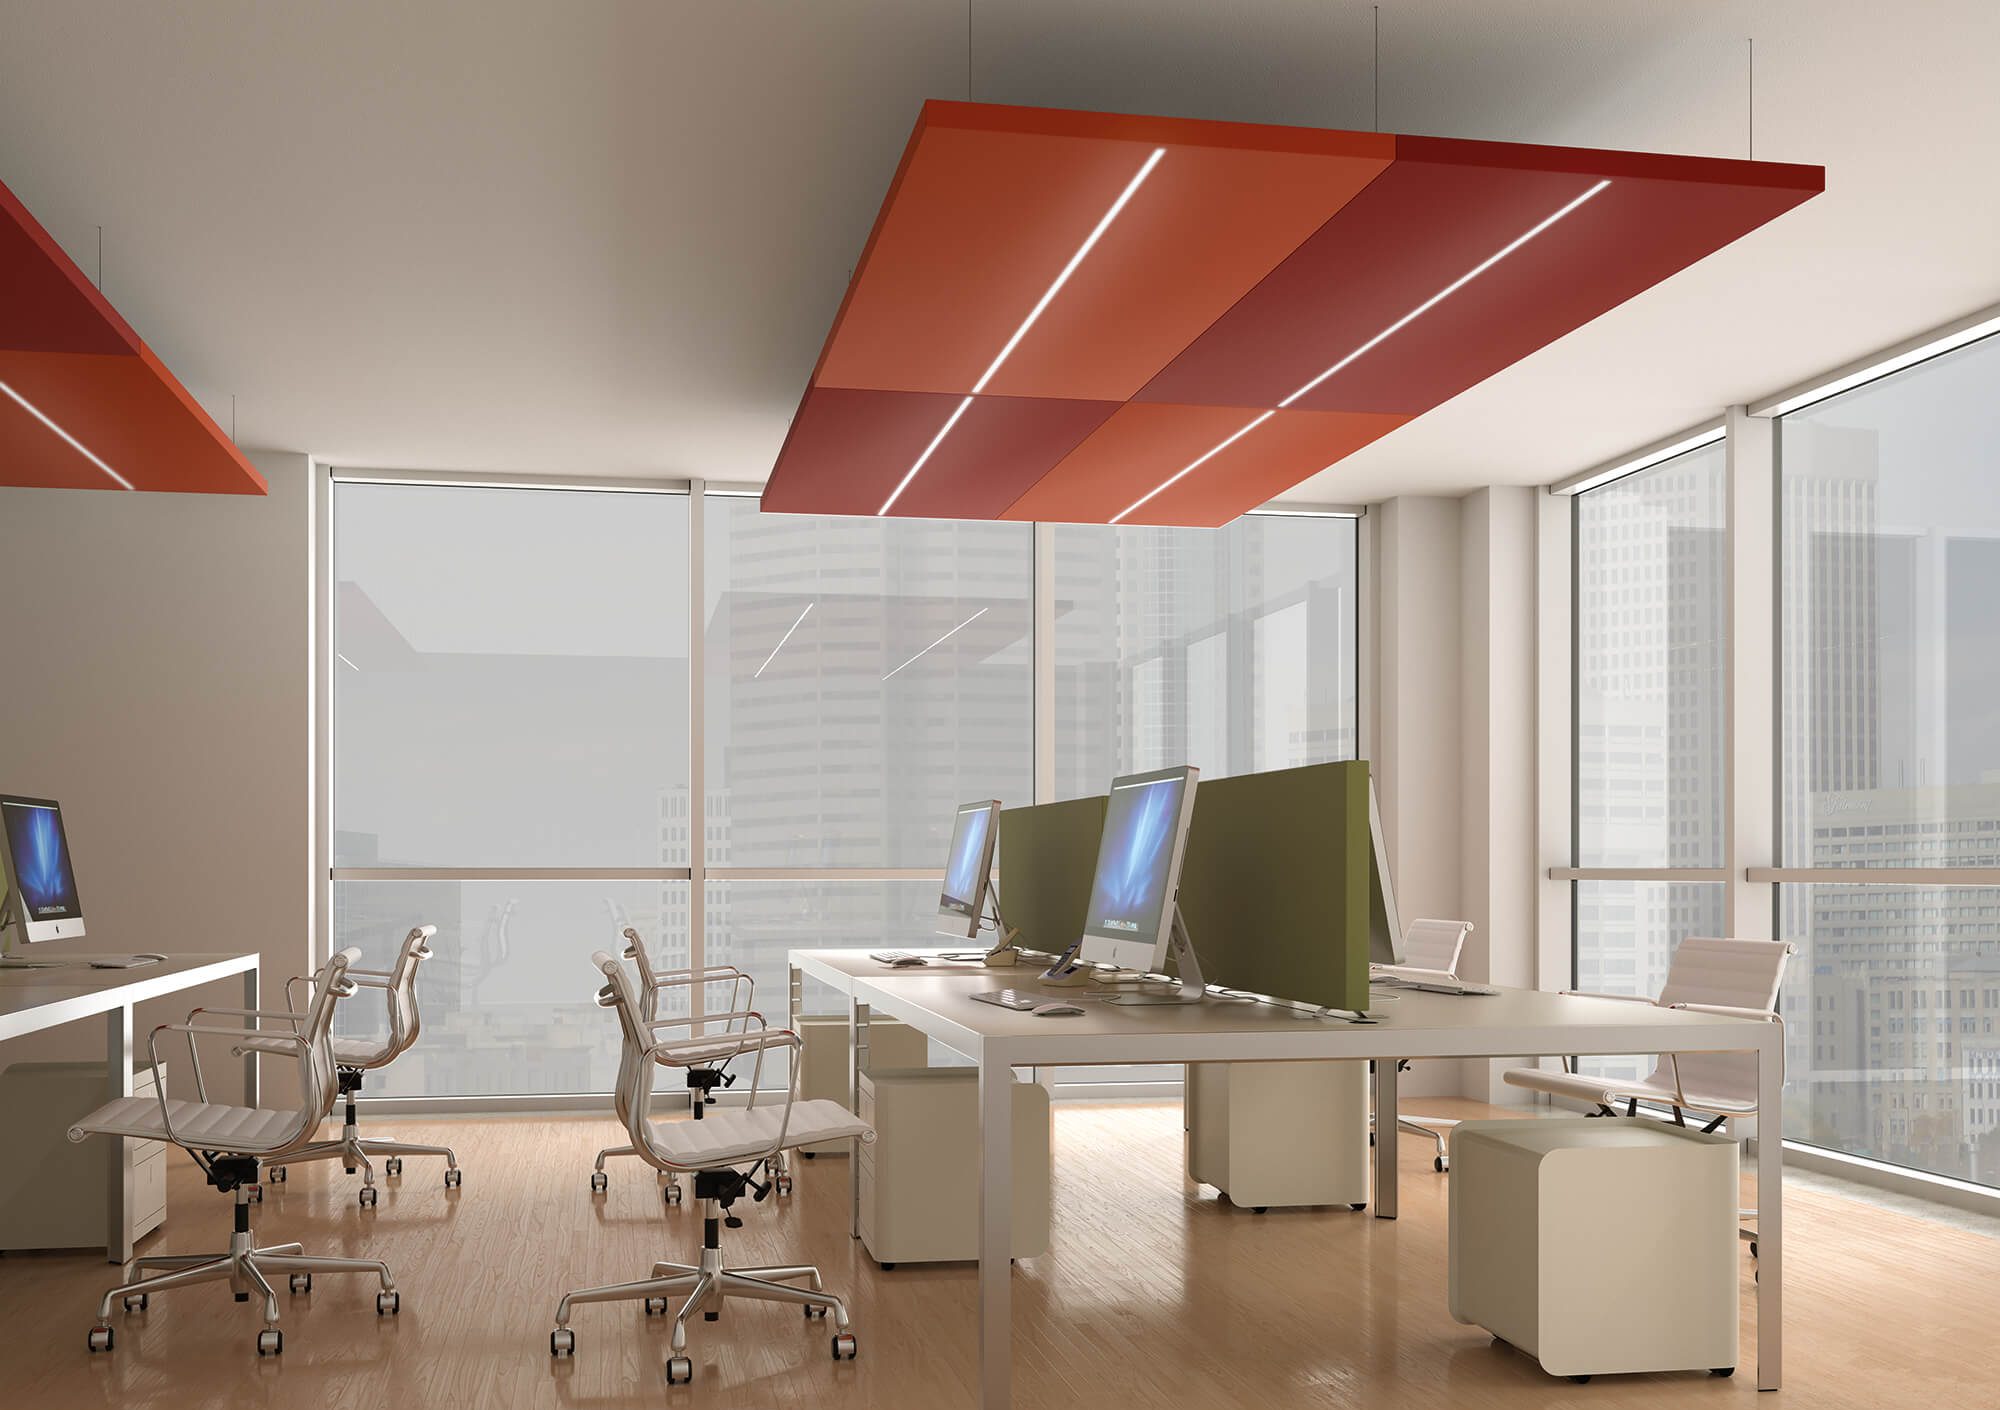 sound_absorbing_material_led_lighting